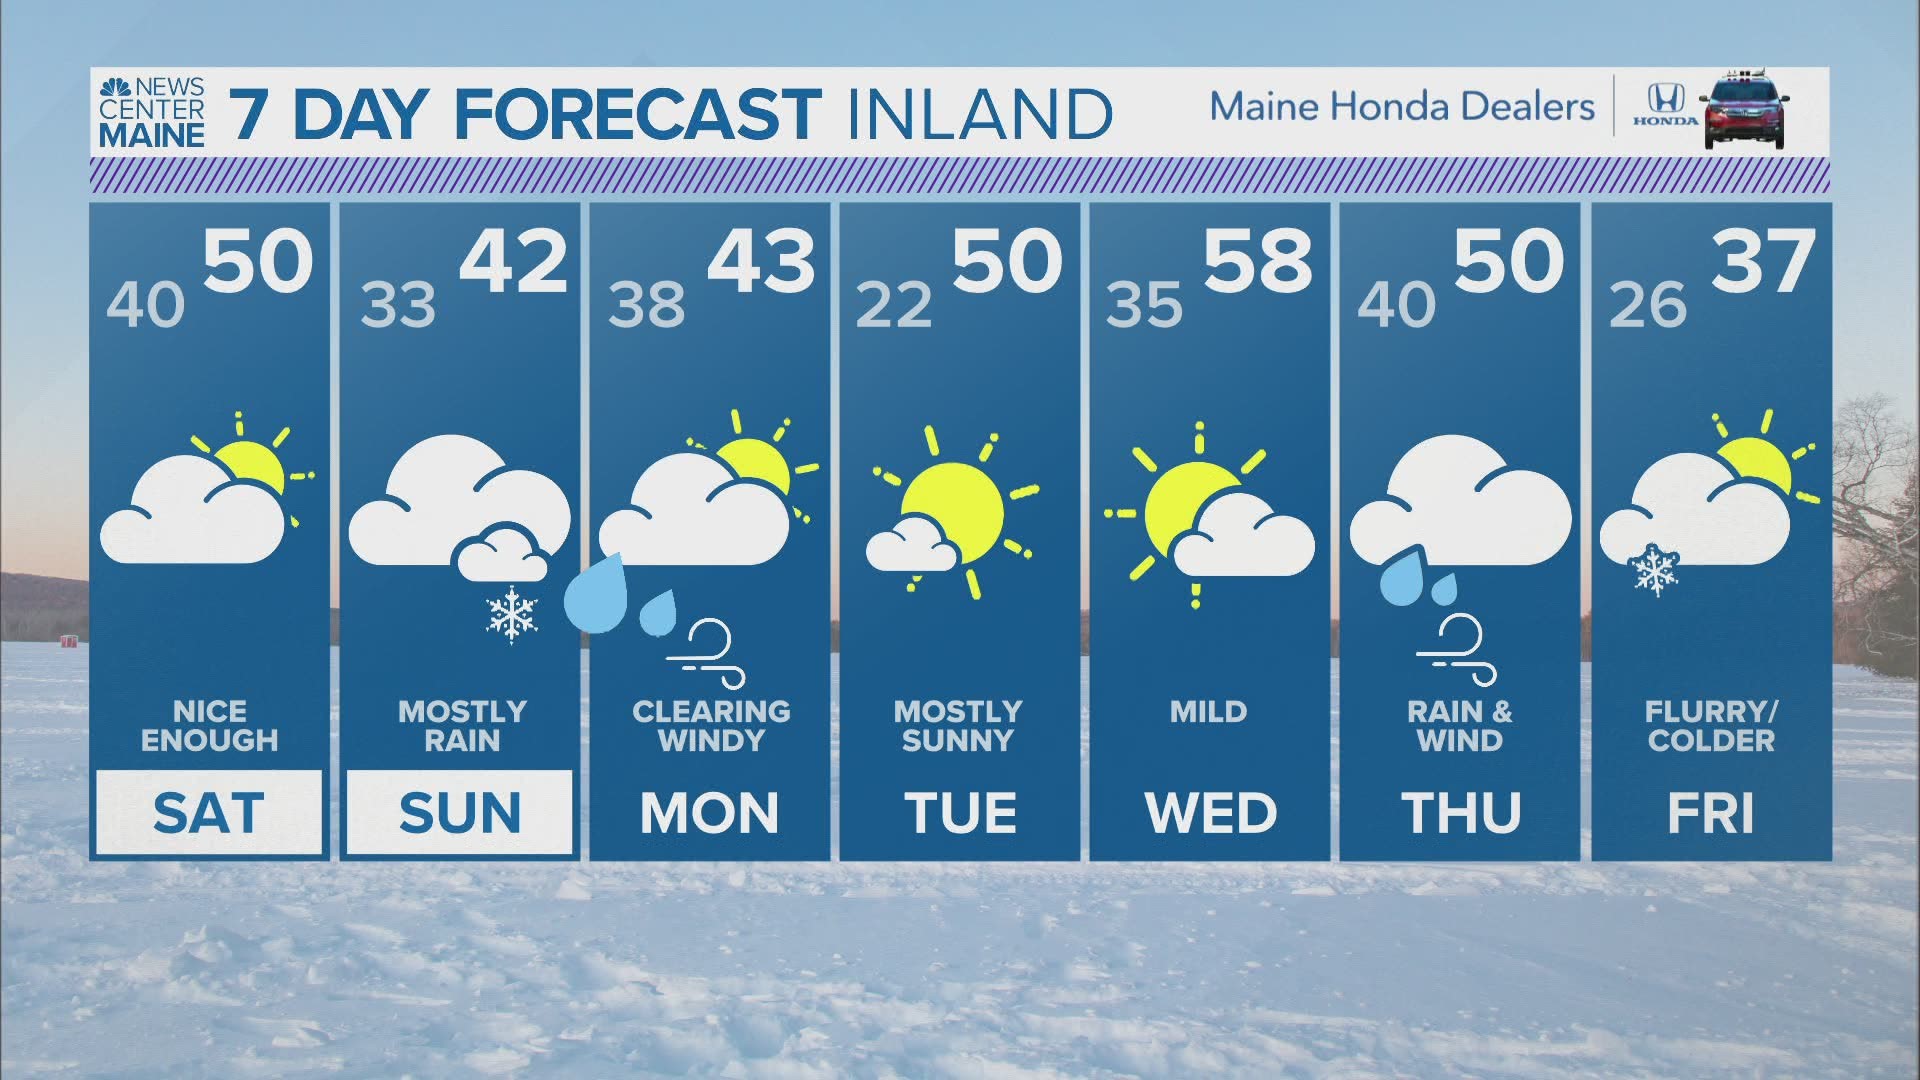 NEWS CENTER Maine Weather Video Forecast UPDATED: Friday March 26, 2021 at 4:00pm.